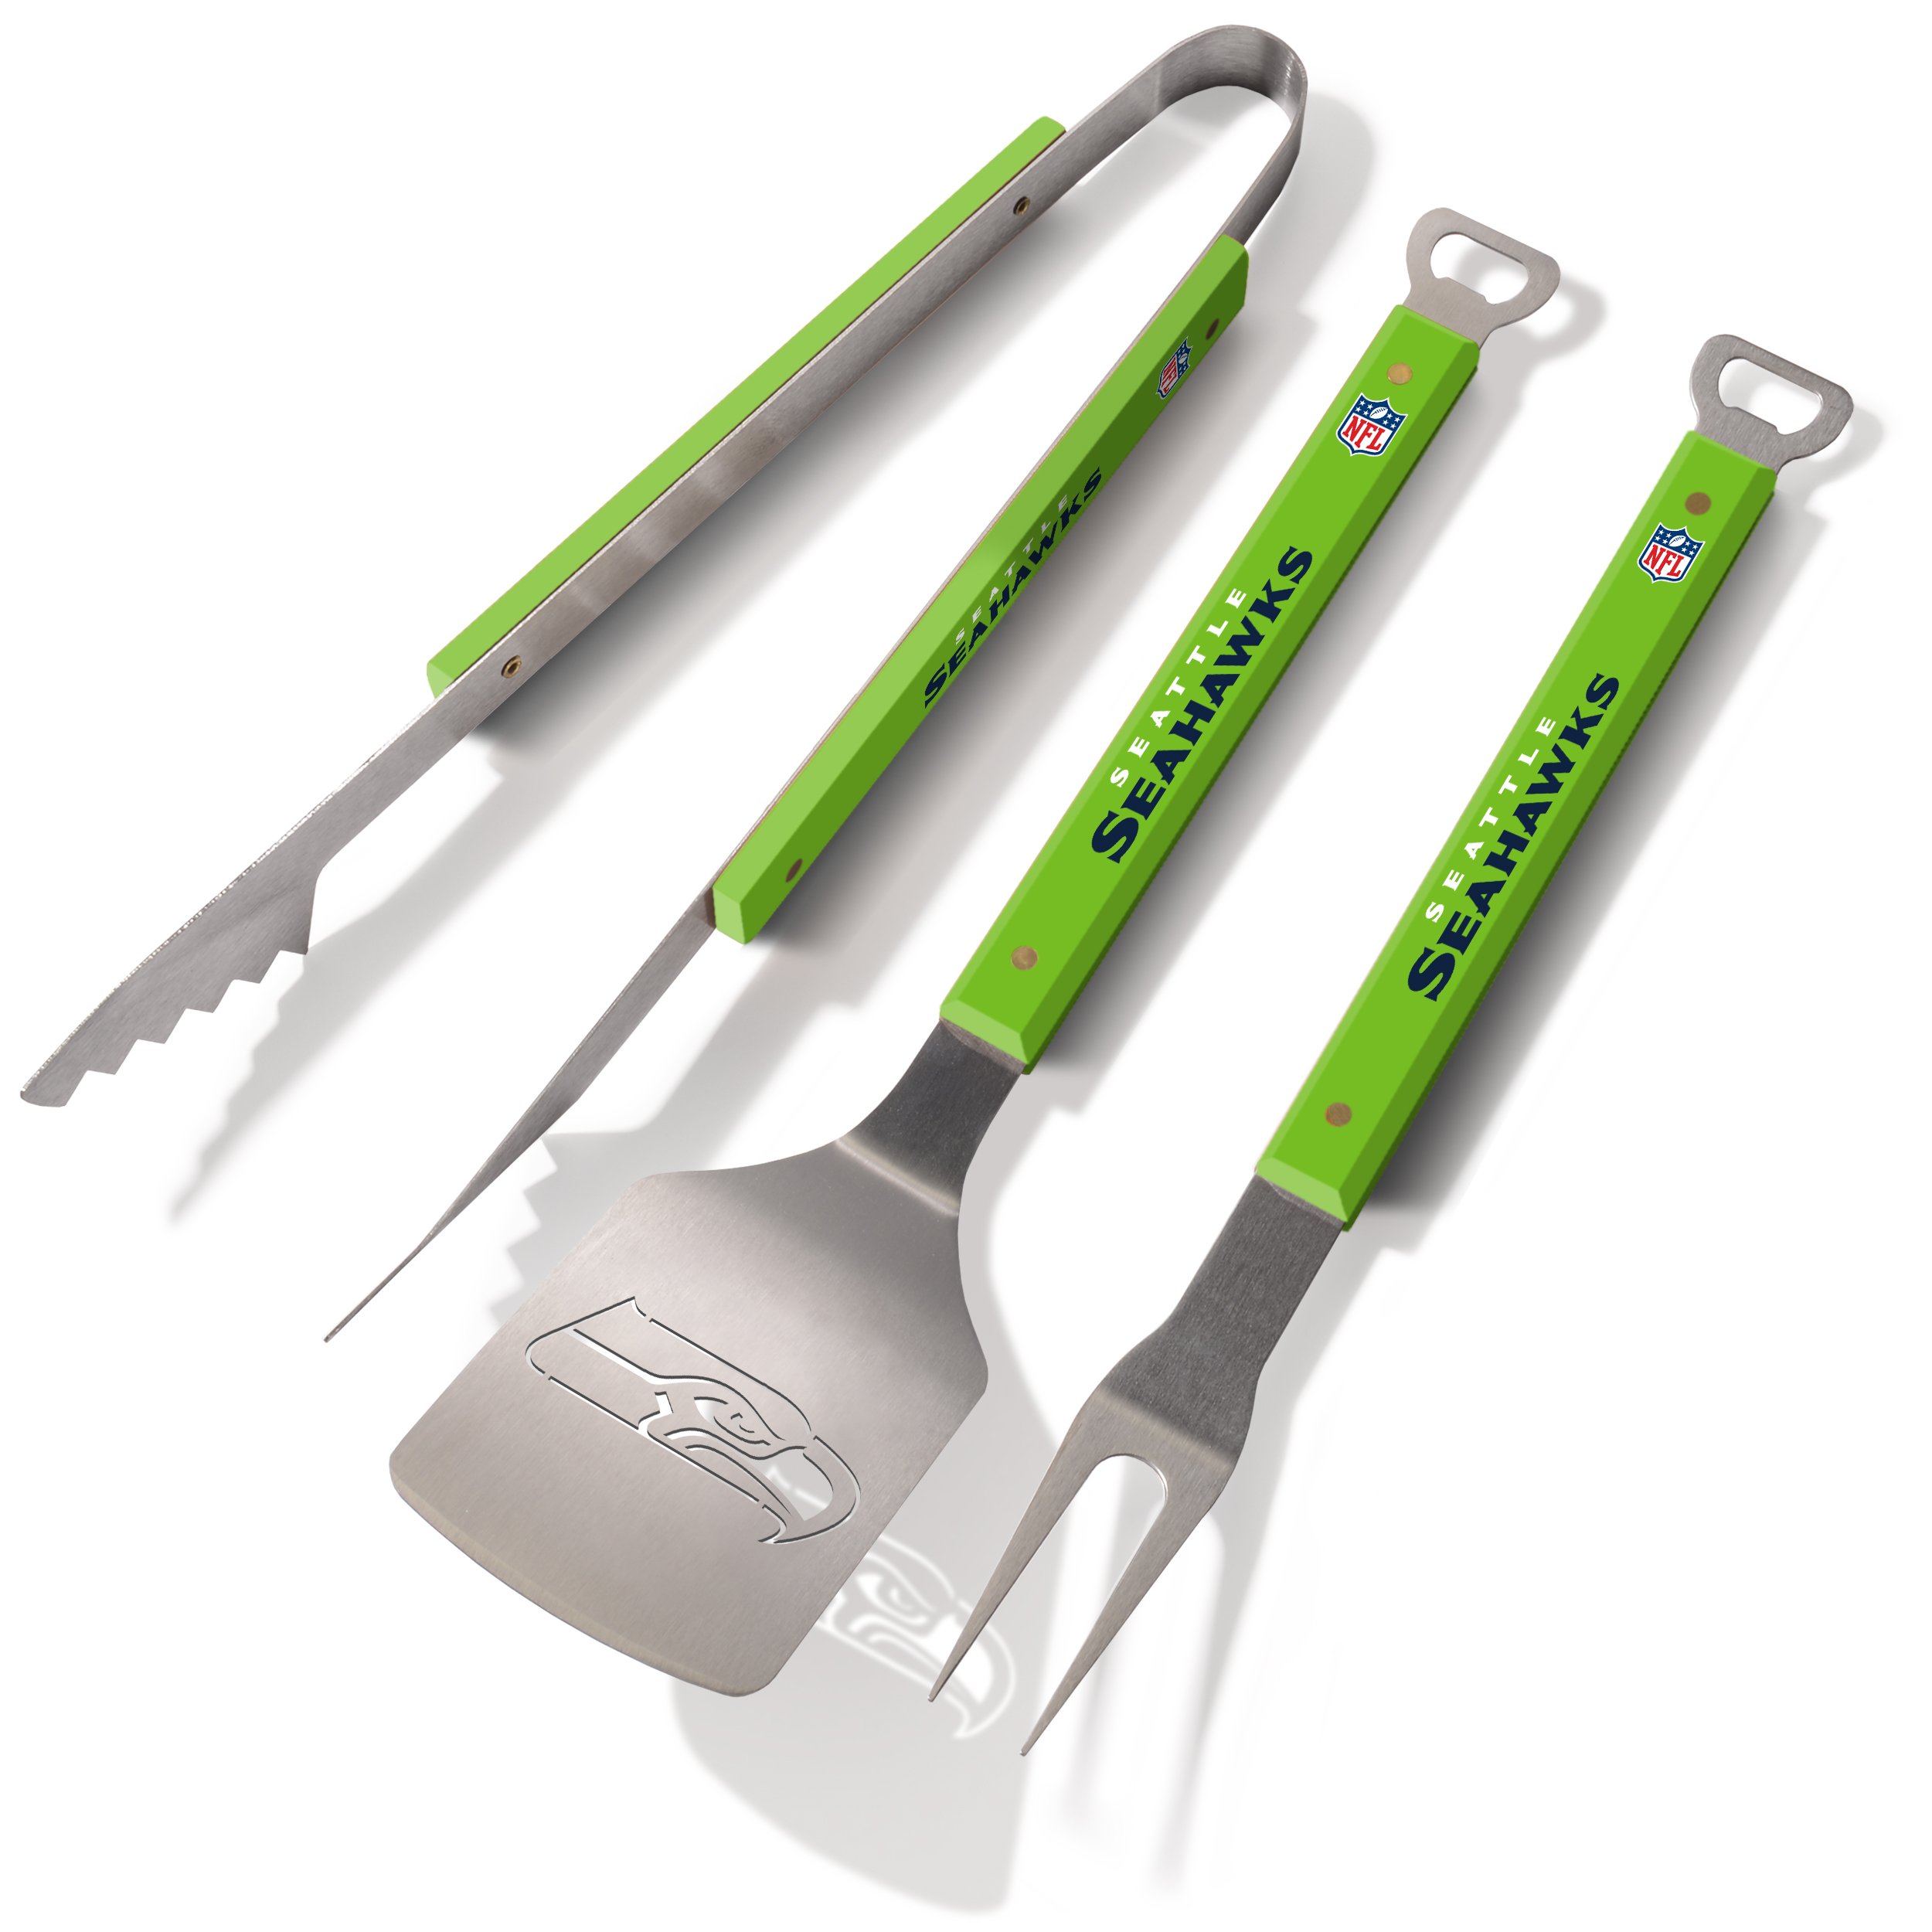 3-Piece YouTheFan NFL Seattle Seahawks or Atlanta Falcons Spirit Series BBQ Set (Stainless Steel) 22" x 9" Each $16.47 & More + Free Shipping w/ Prime or on $35+